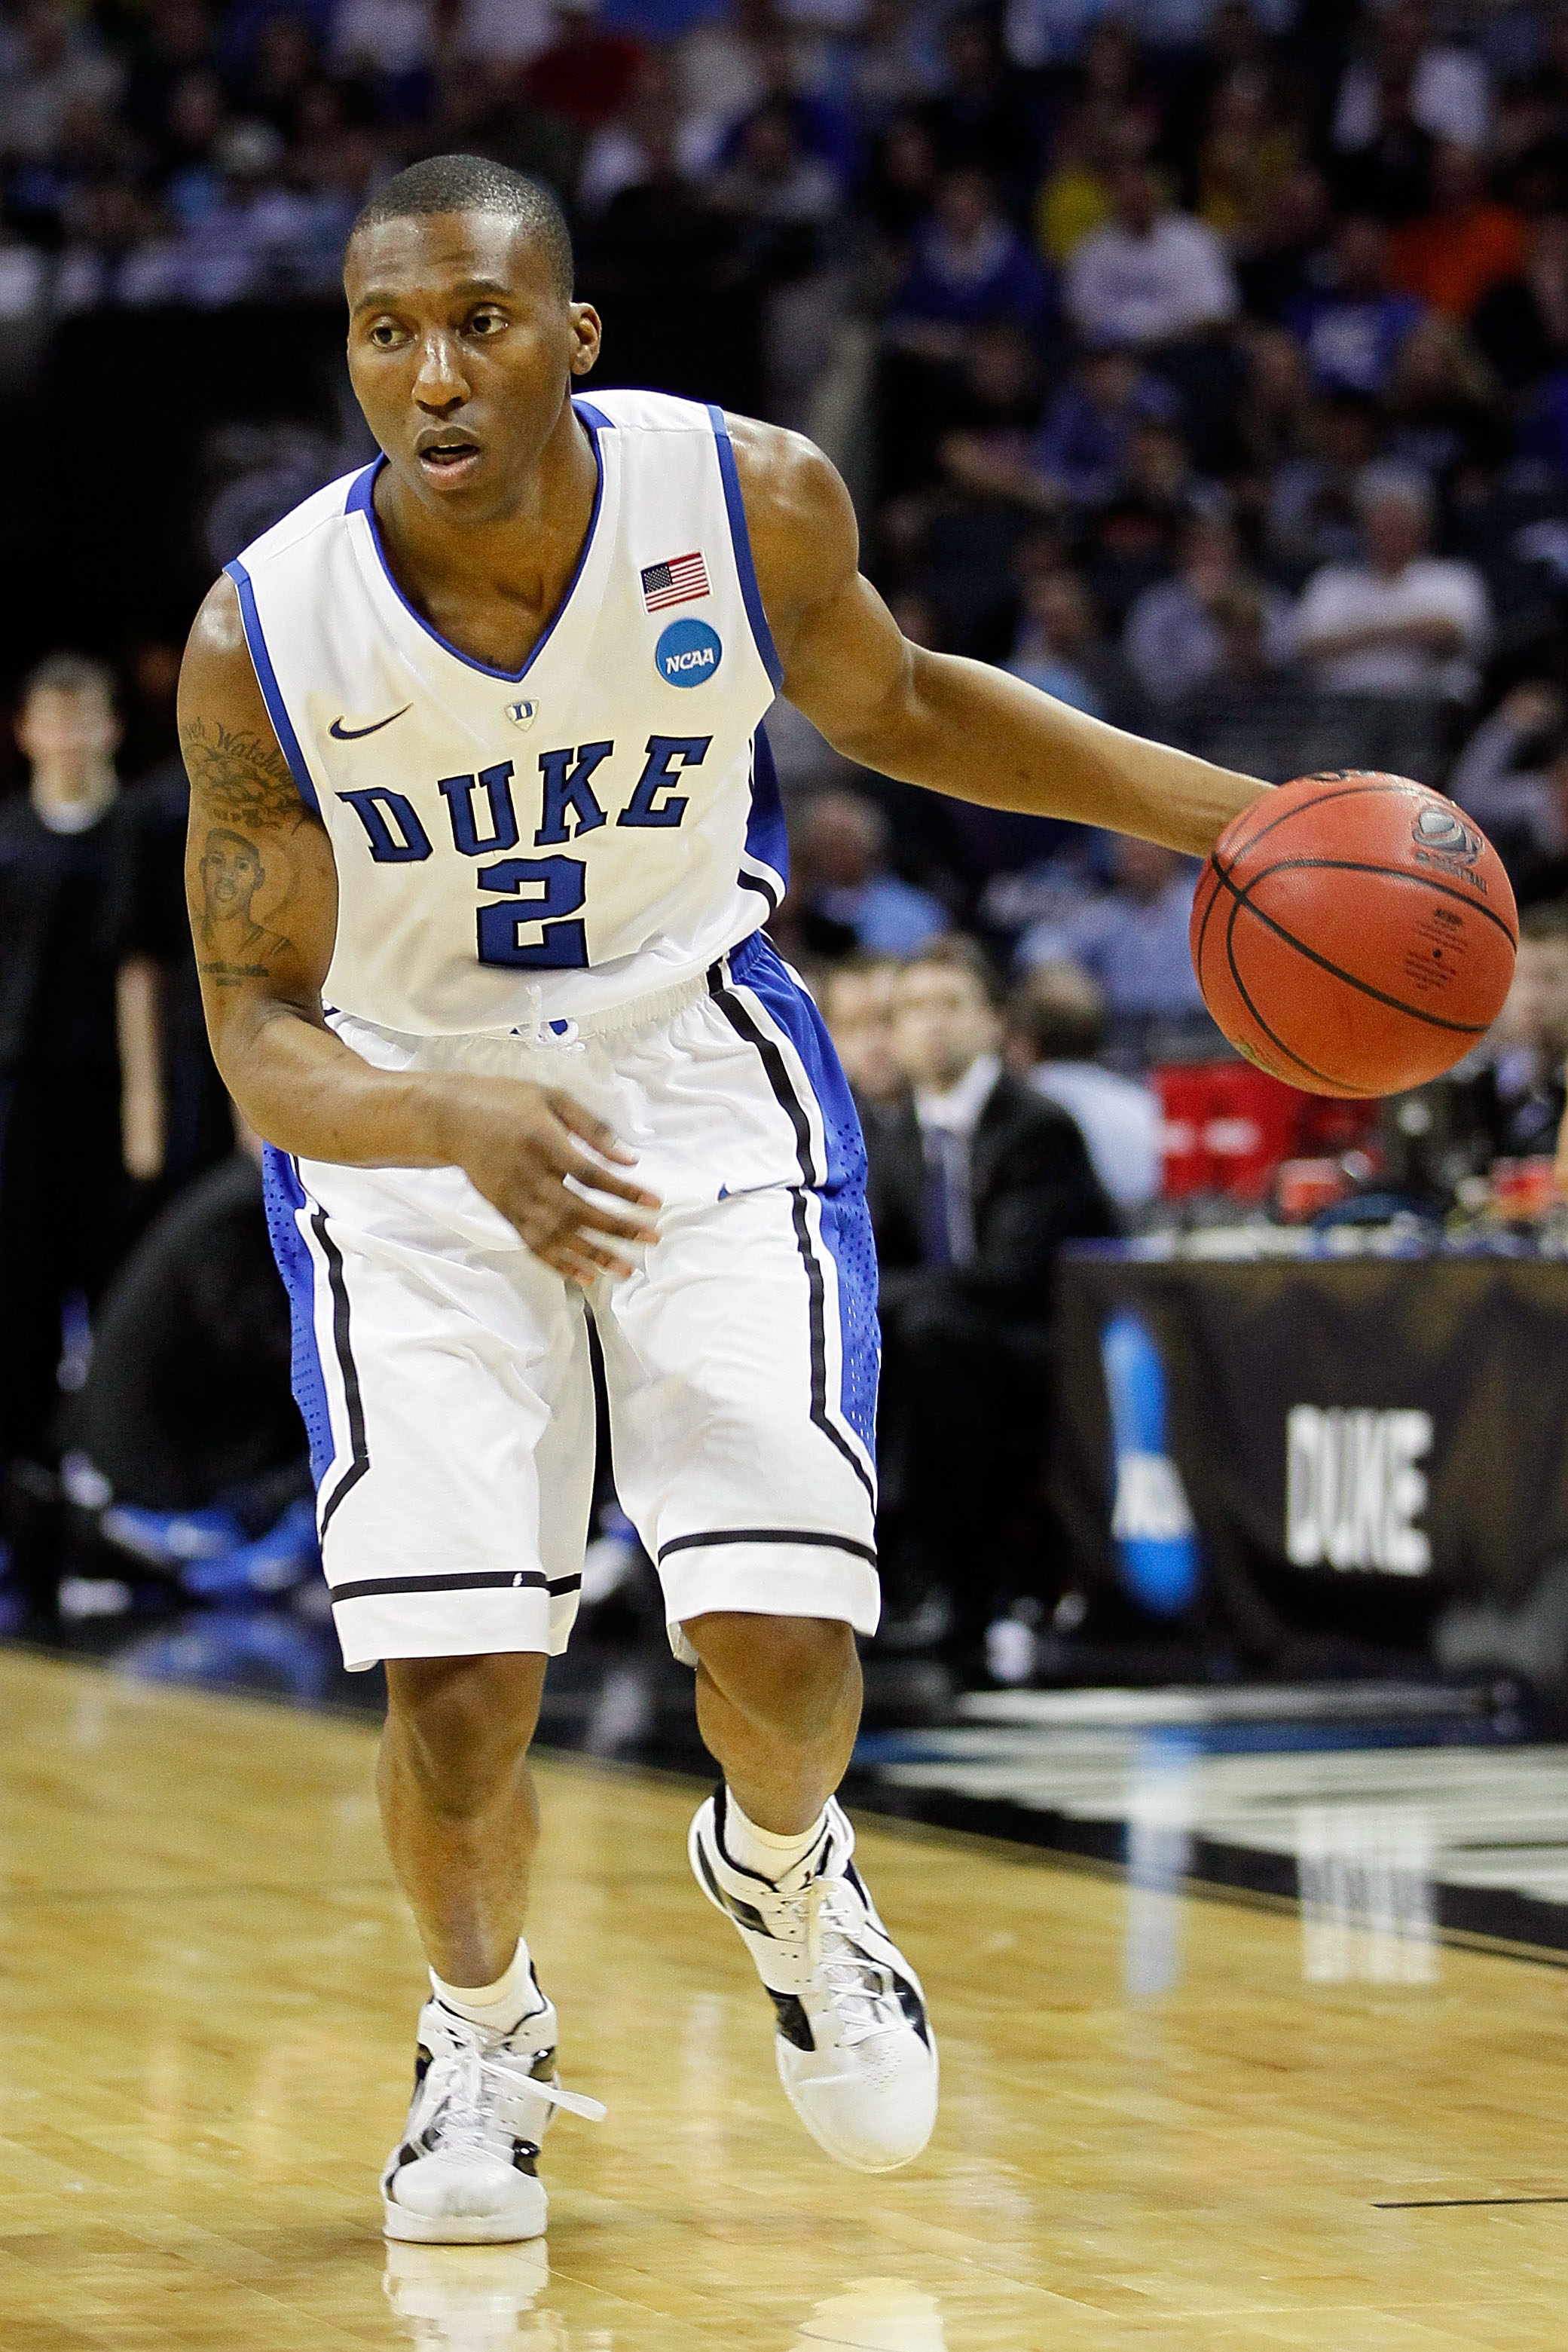 CHARLOTTE, NC - MARCH 20:  Nolan Smith #2 of the Duke Blue Devils moves the ball while taking on the Michigan Wolverines during the third round of the 2011 NCAA men's basketball tournament at Time Warner Cable Arena on March 20, 2011 in Charlotte, North C